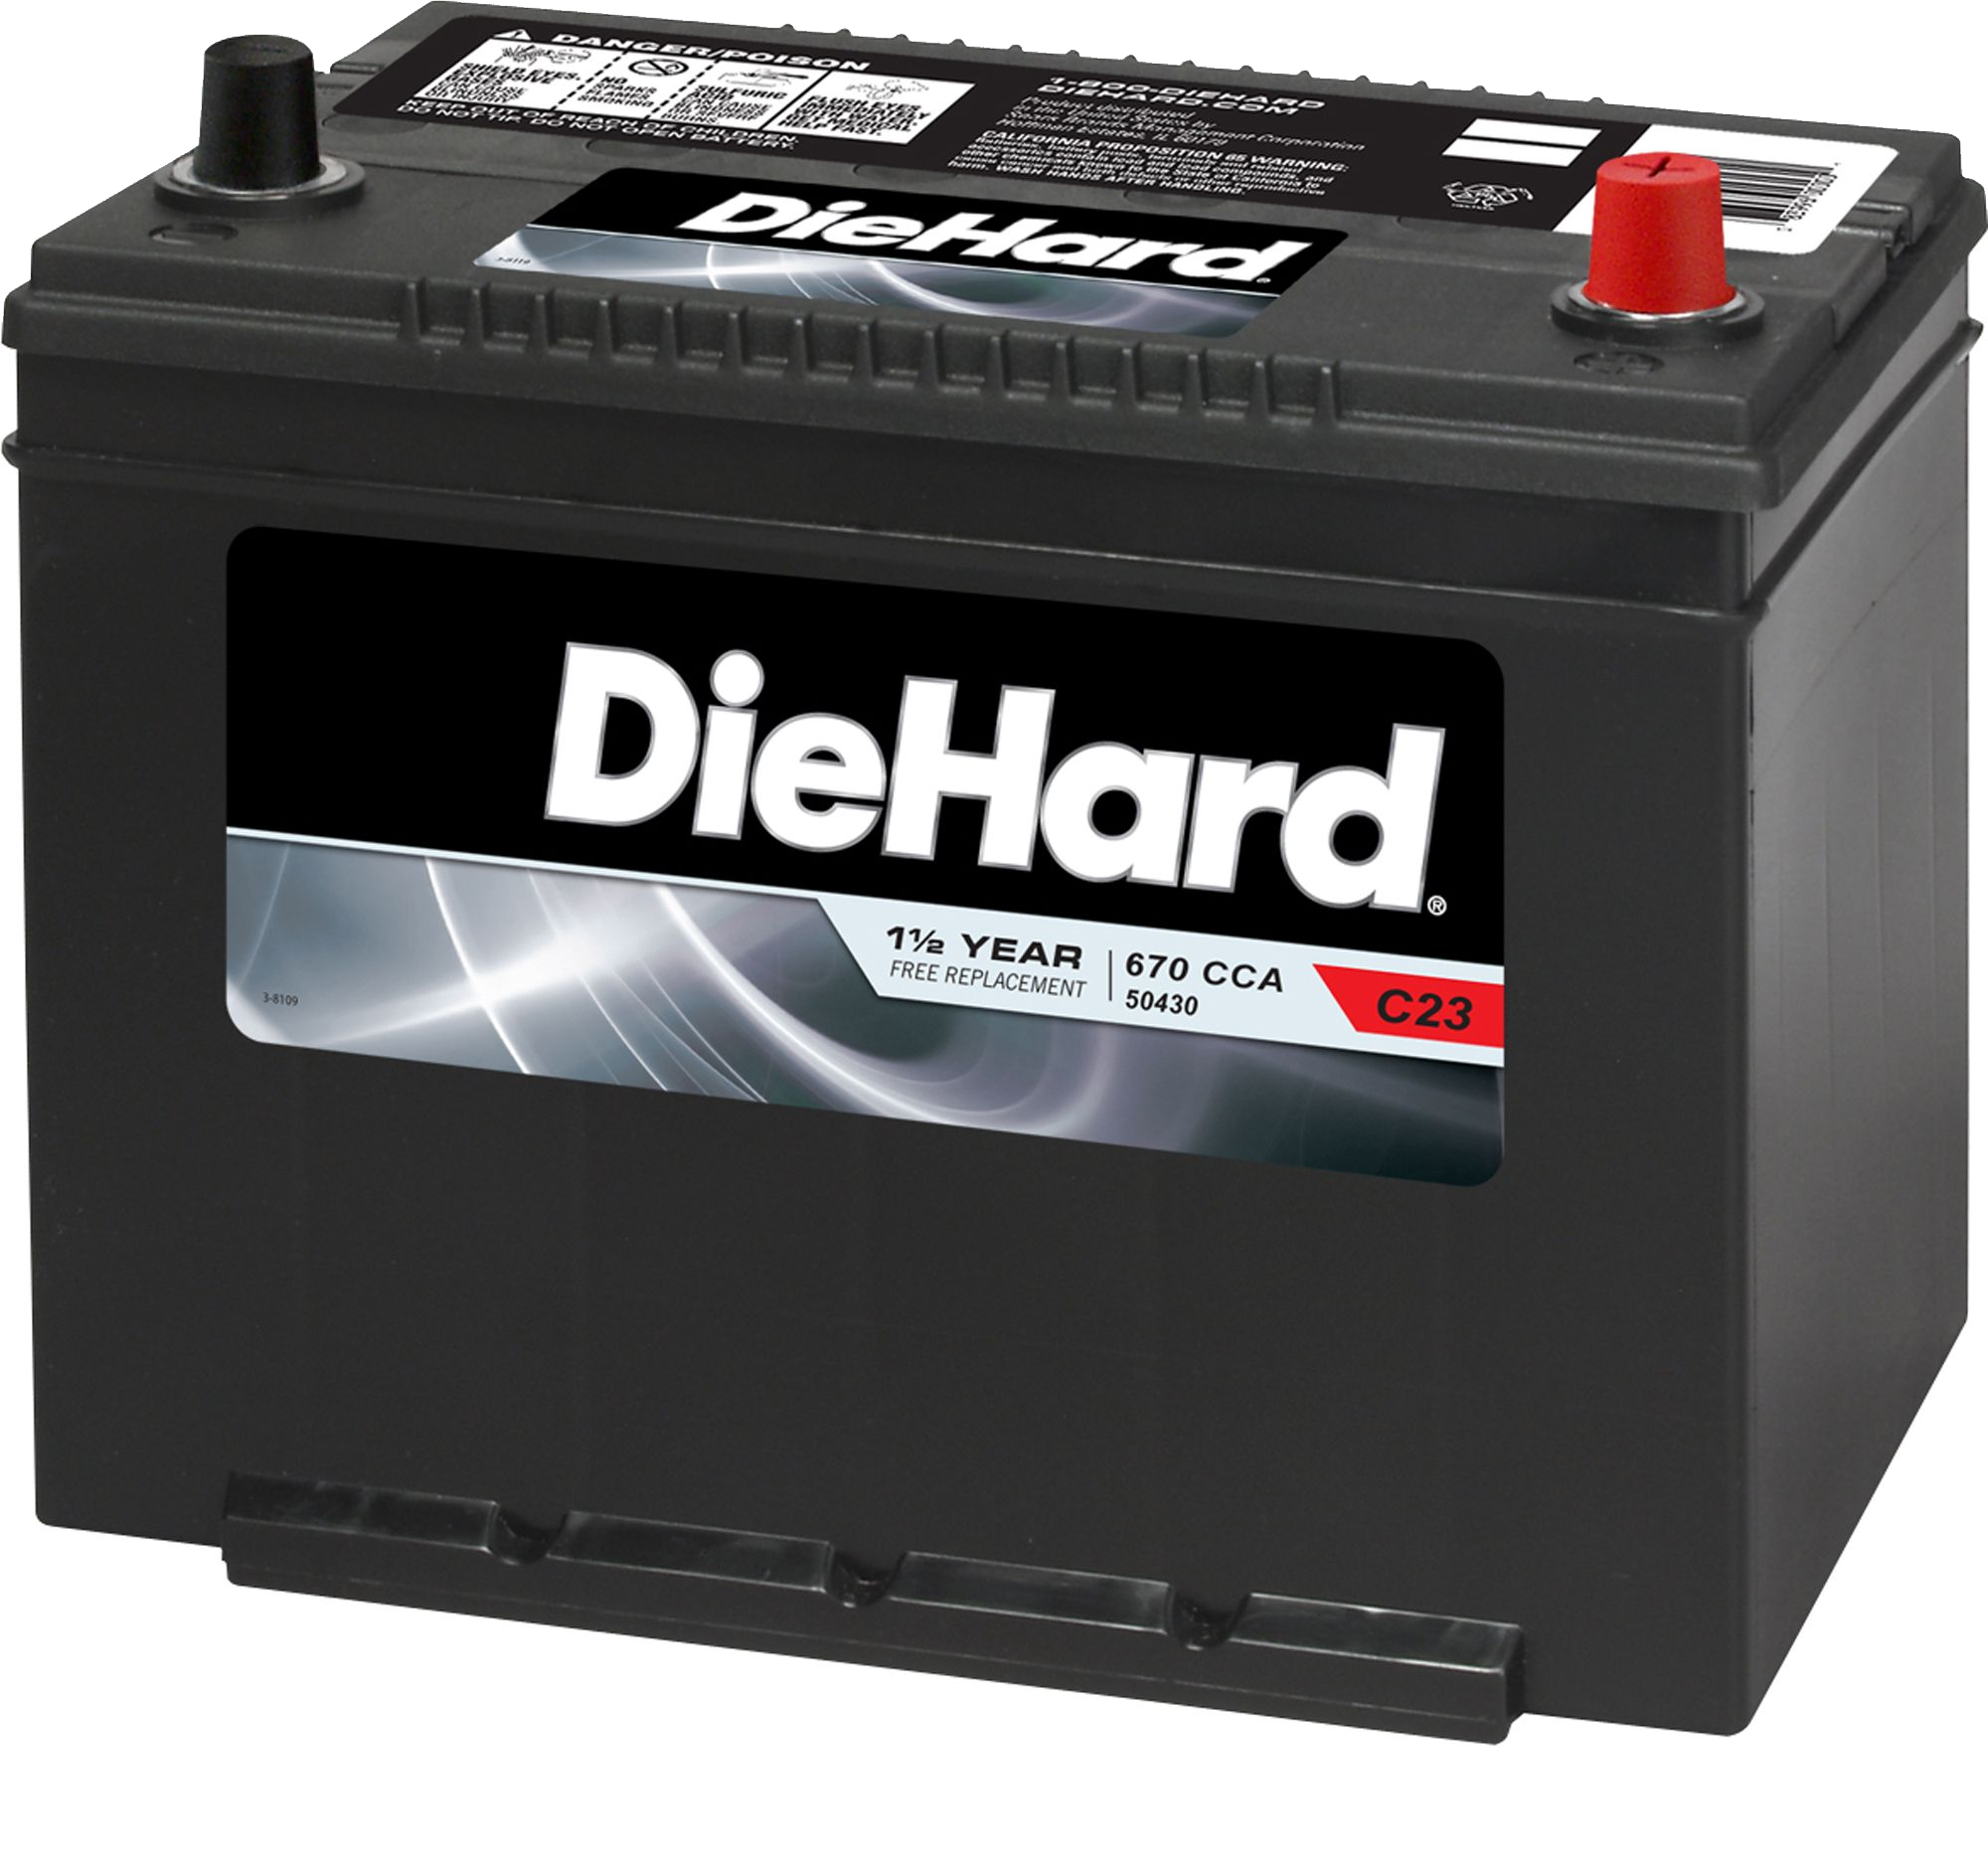 Car battery PNG